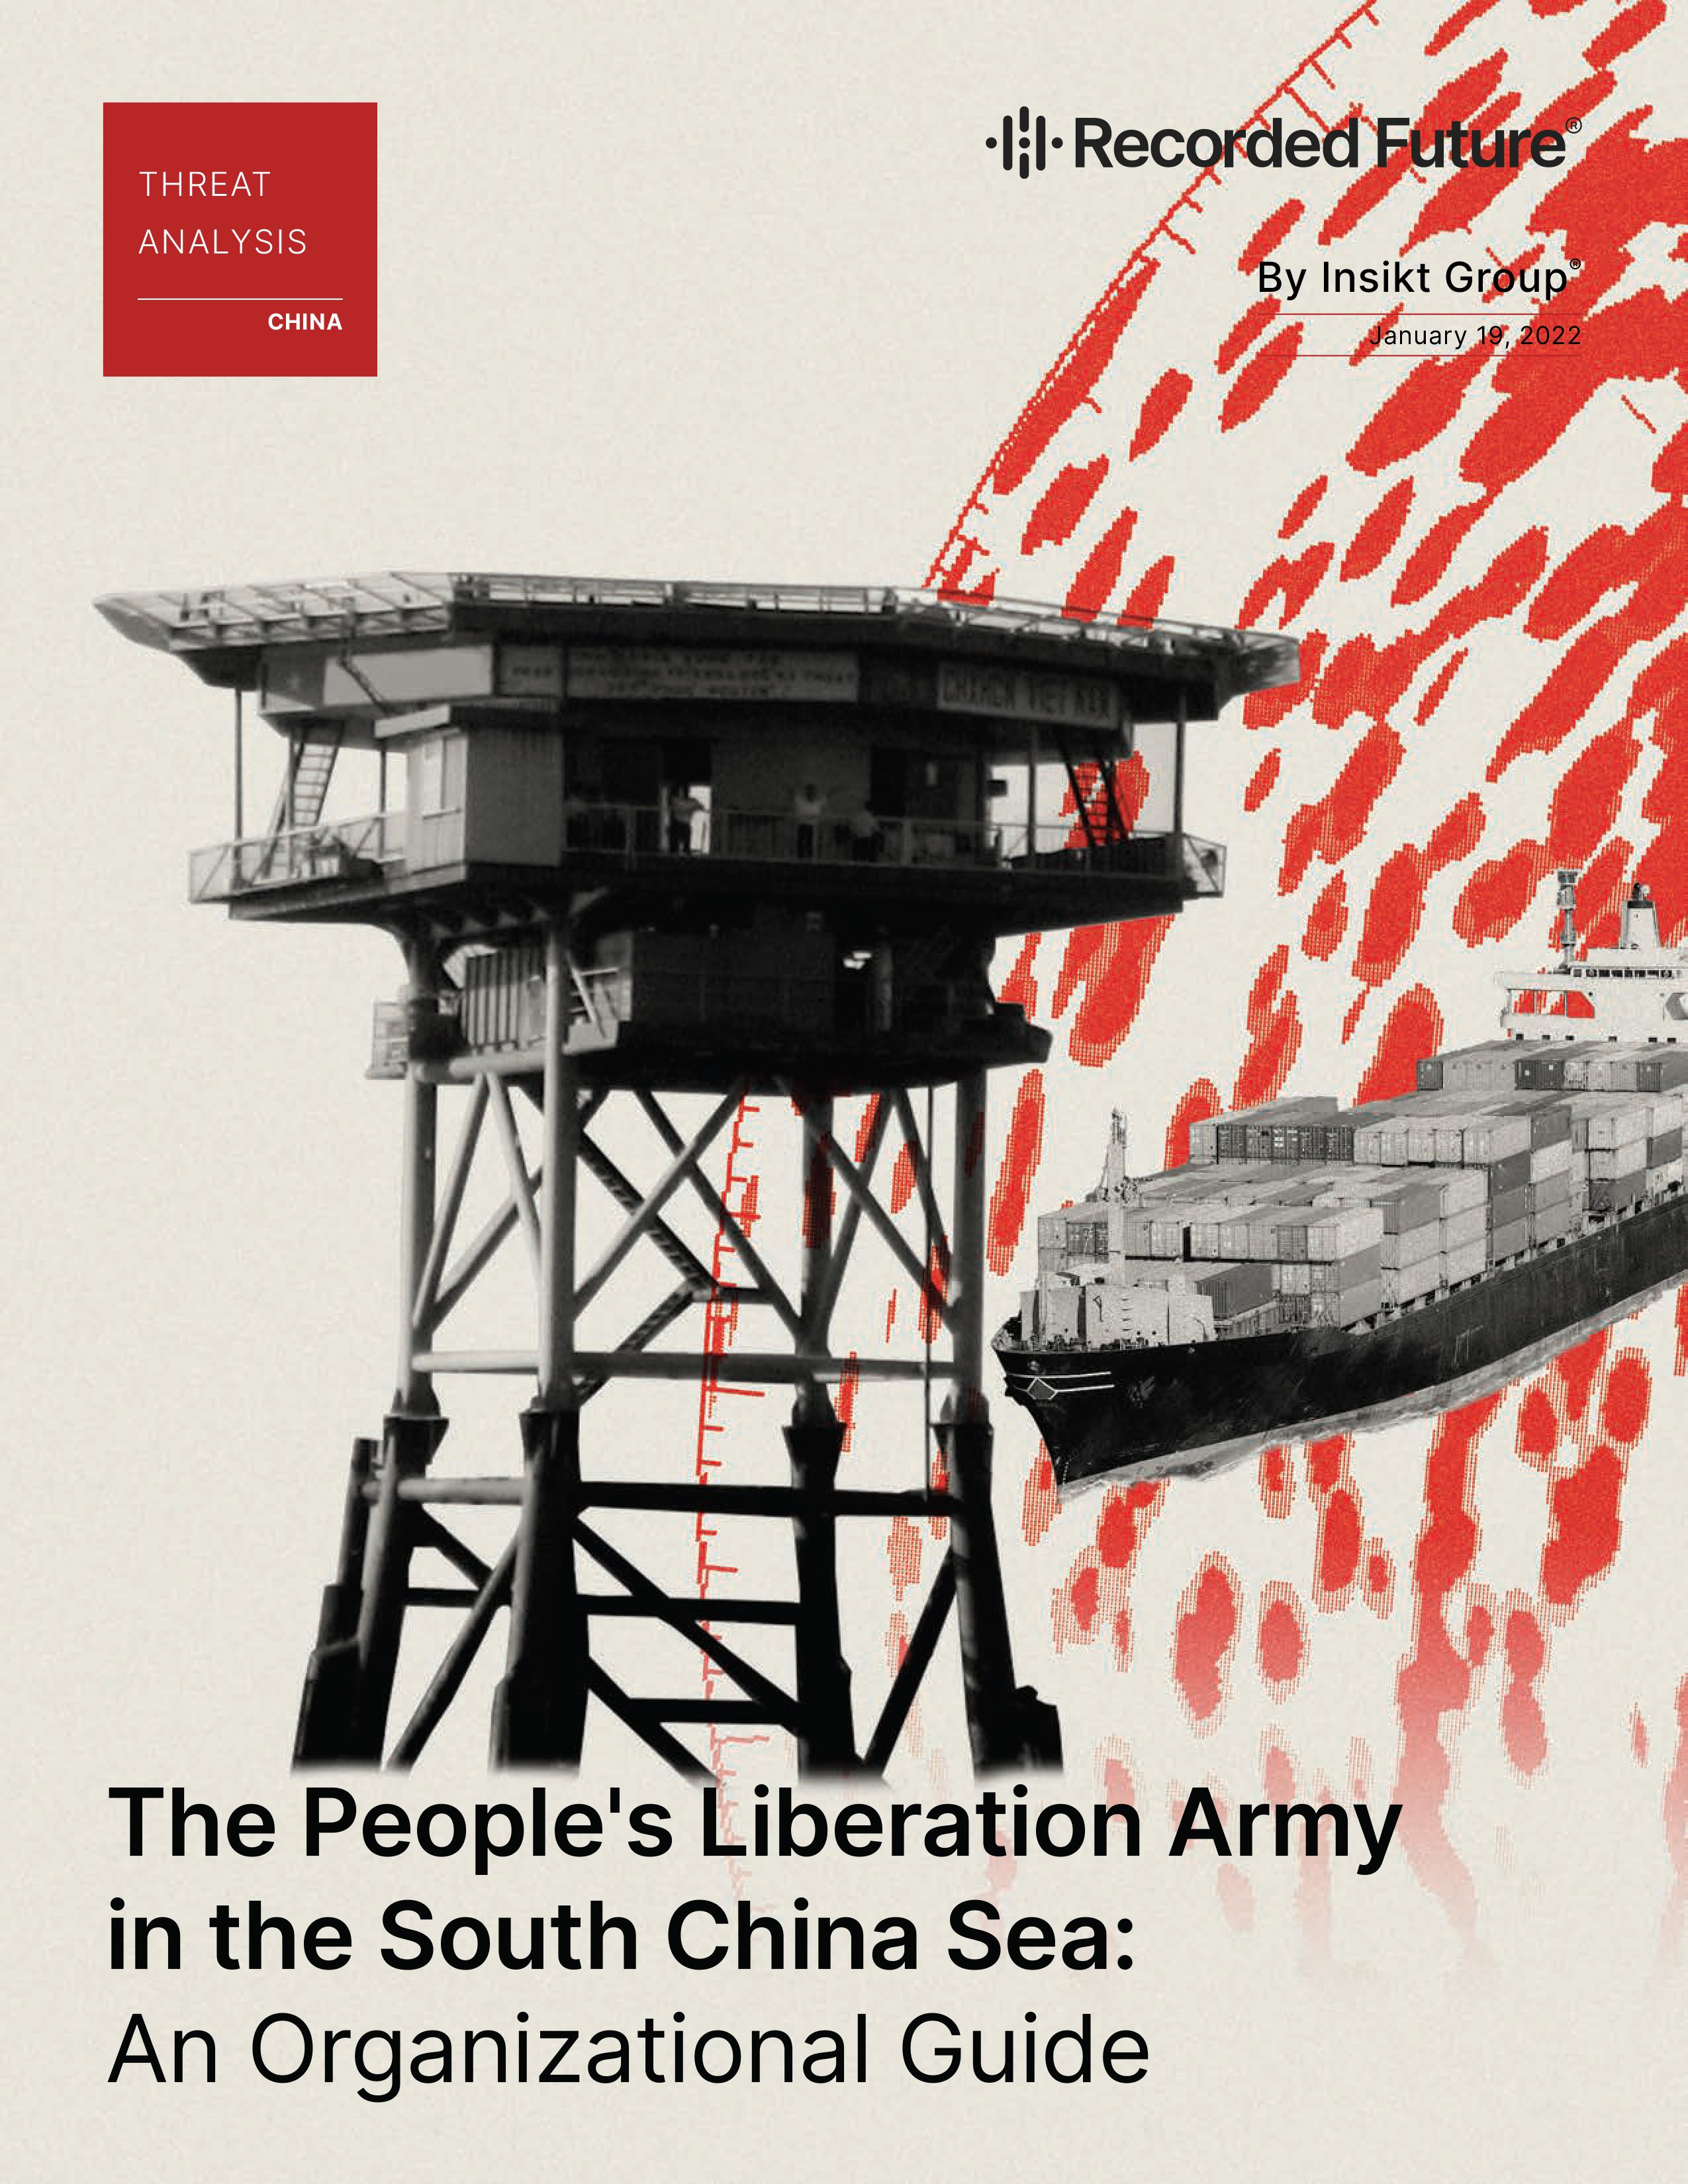 The People's Liberation Army in the South China Sea: An Organizational Guide